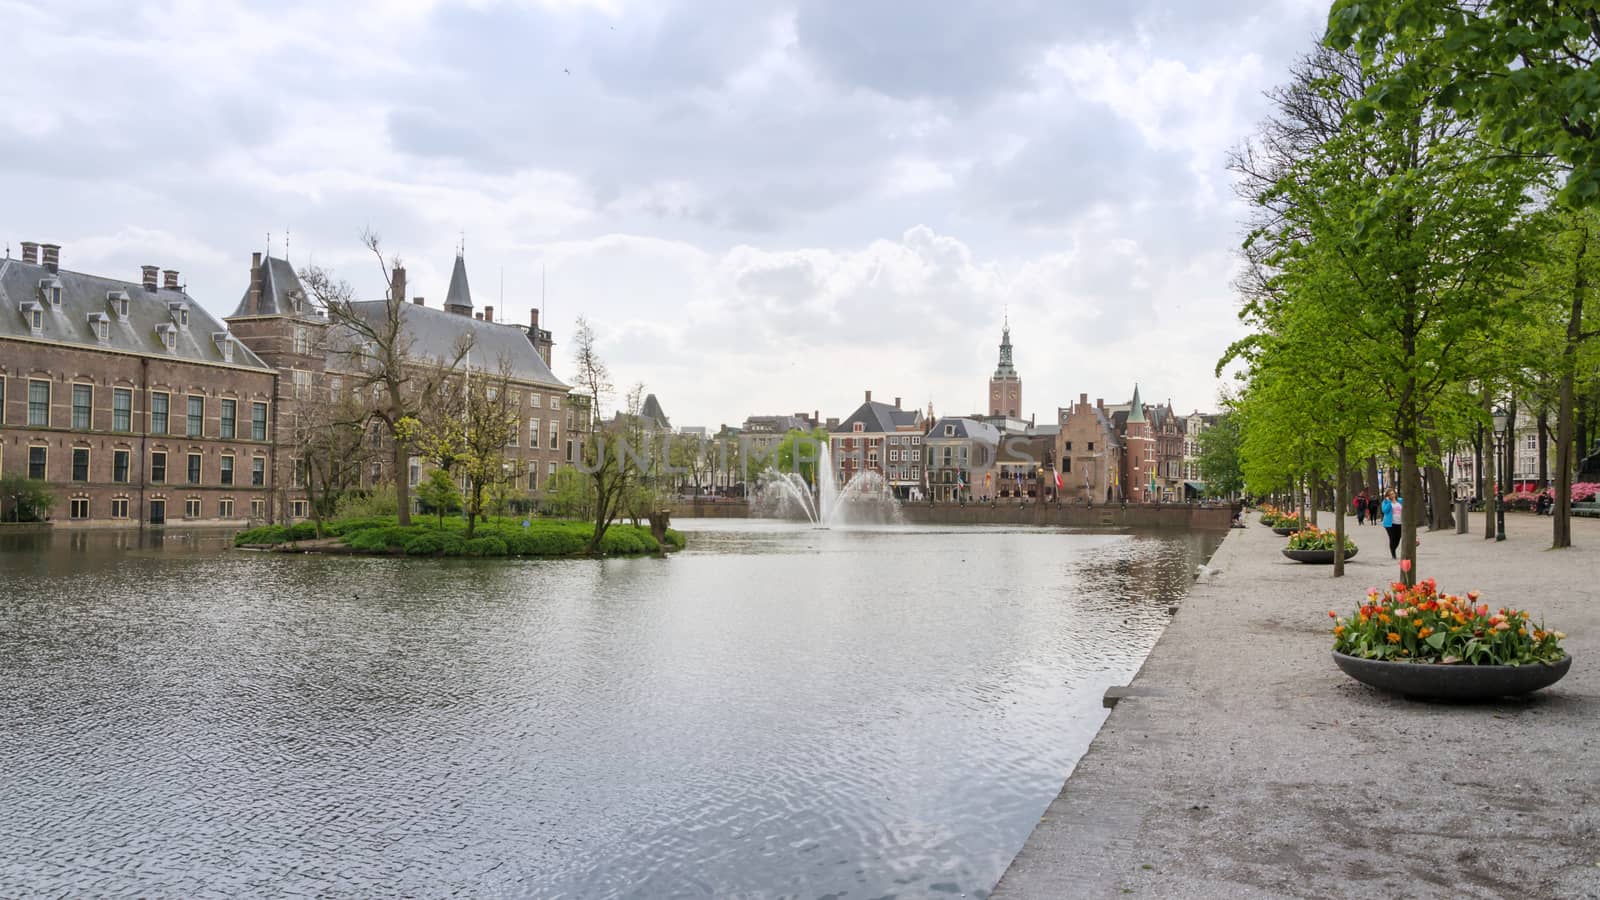 The Hague, Netherlands - May 8, 2015: People visit Famous parliament building complex Binnenhof by siraanamwong